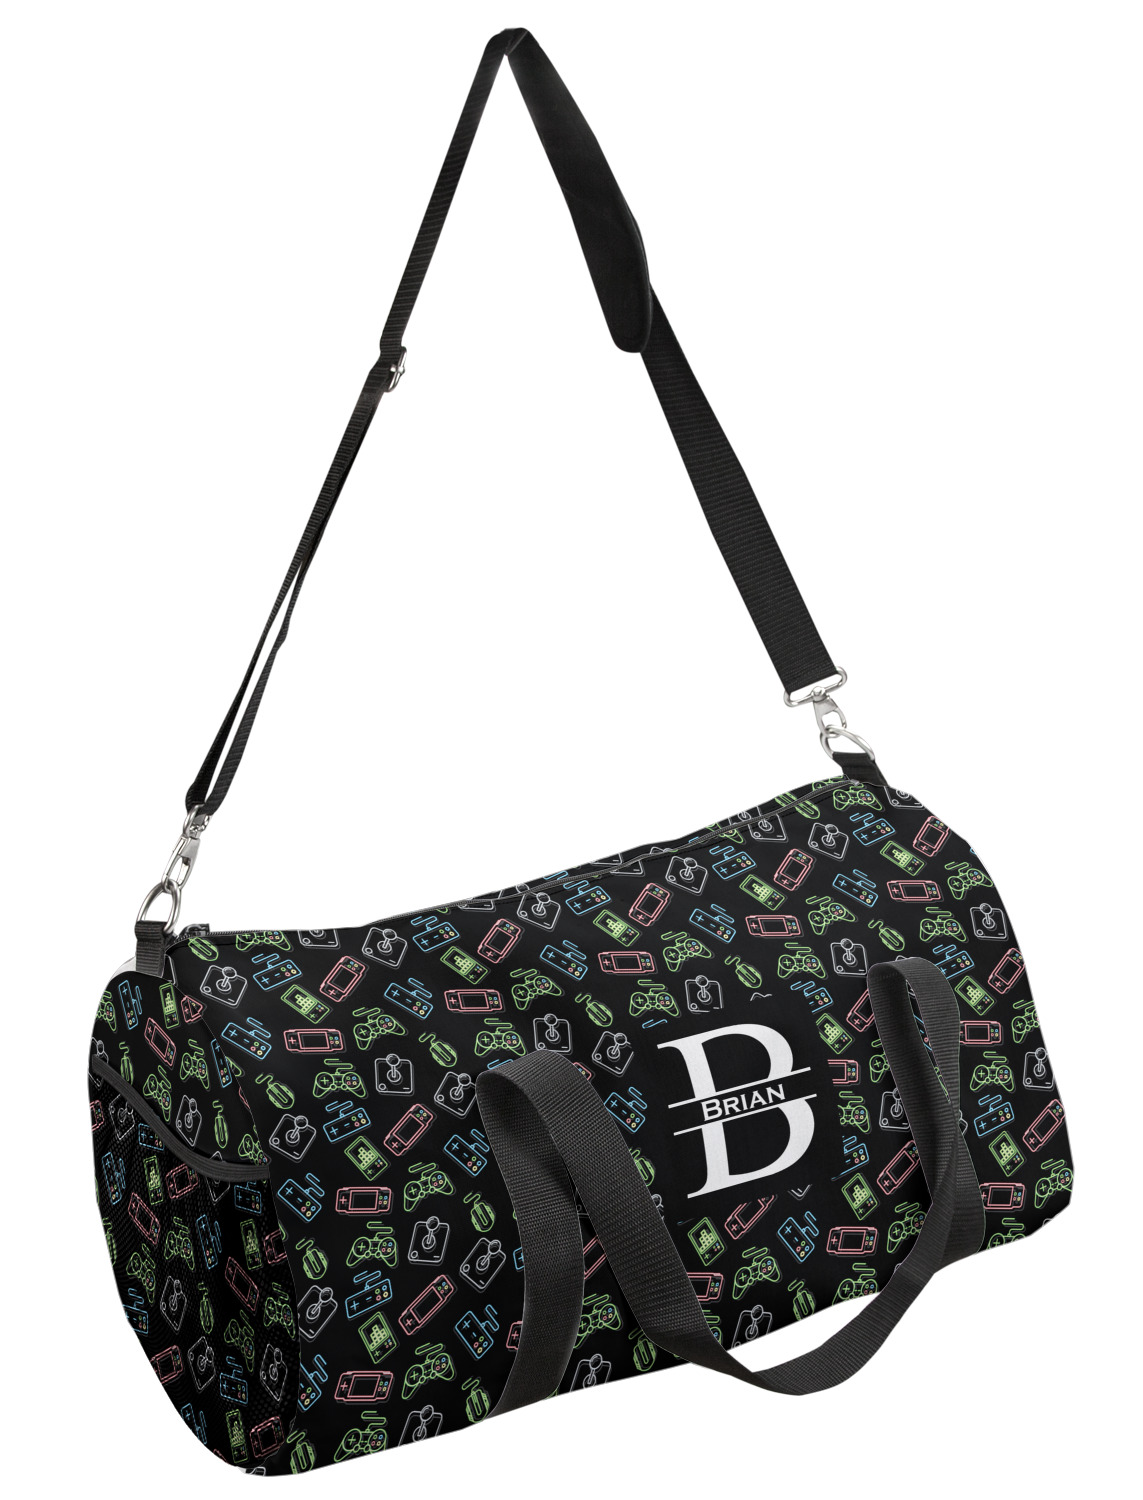 Video Game Duffel Bag - Small (Personalized) - YouCustomizeIt